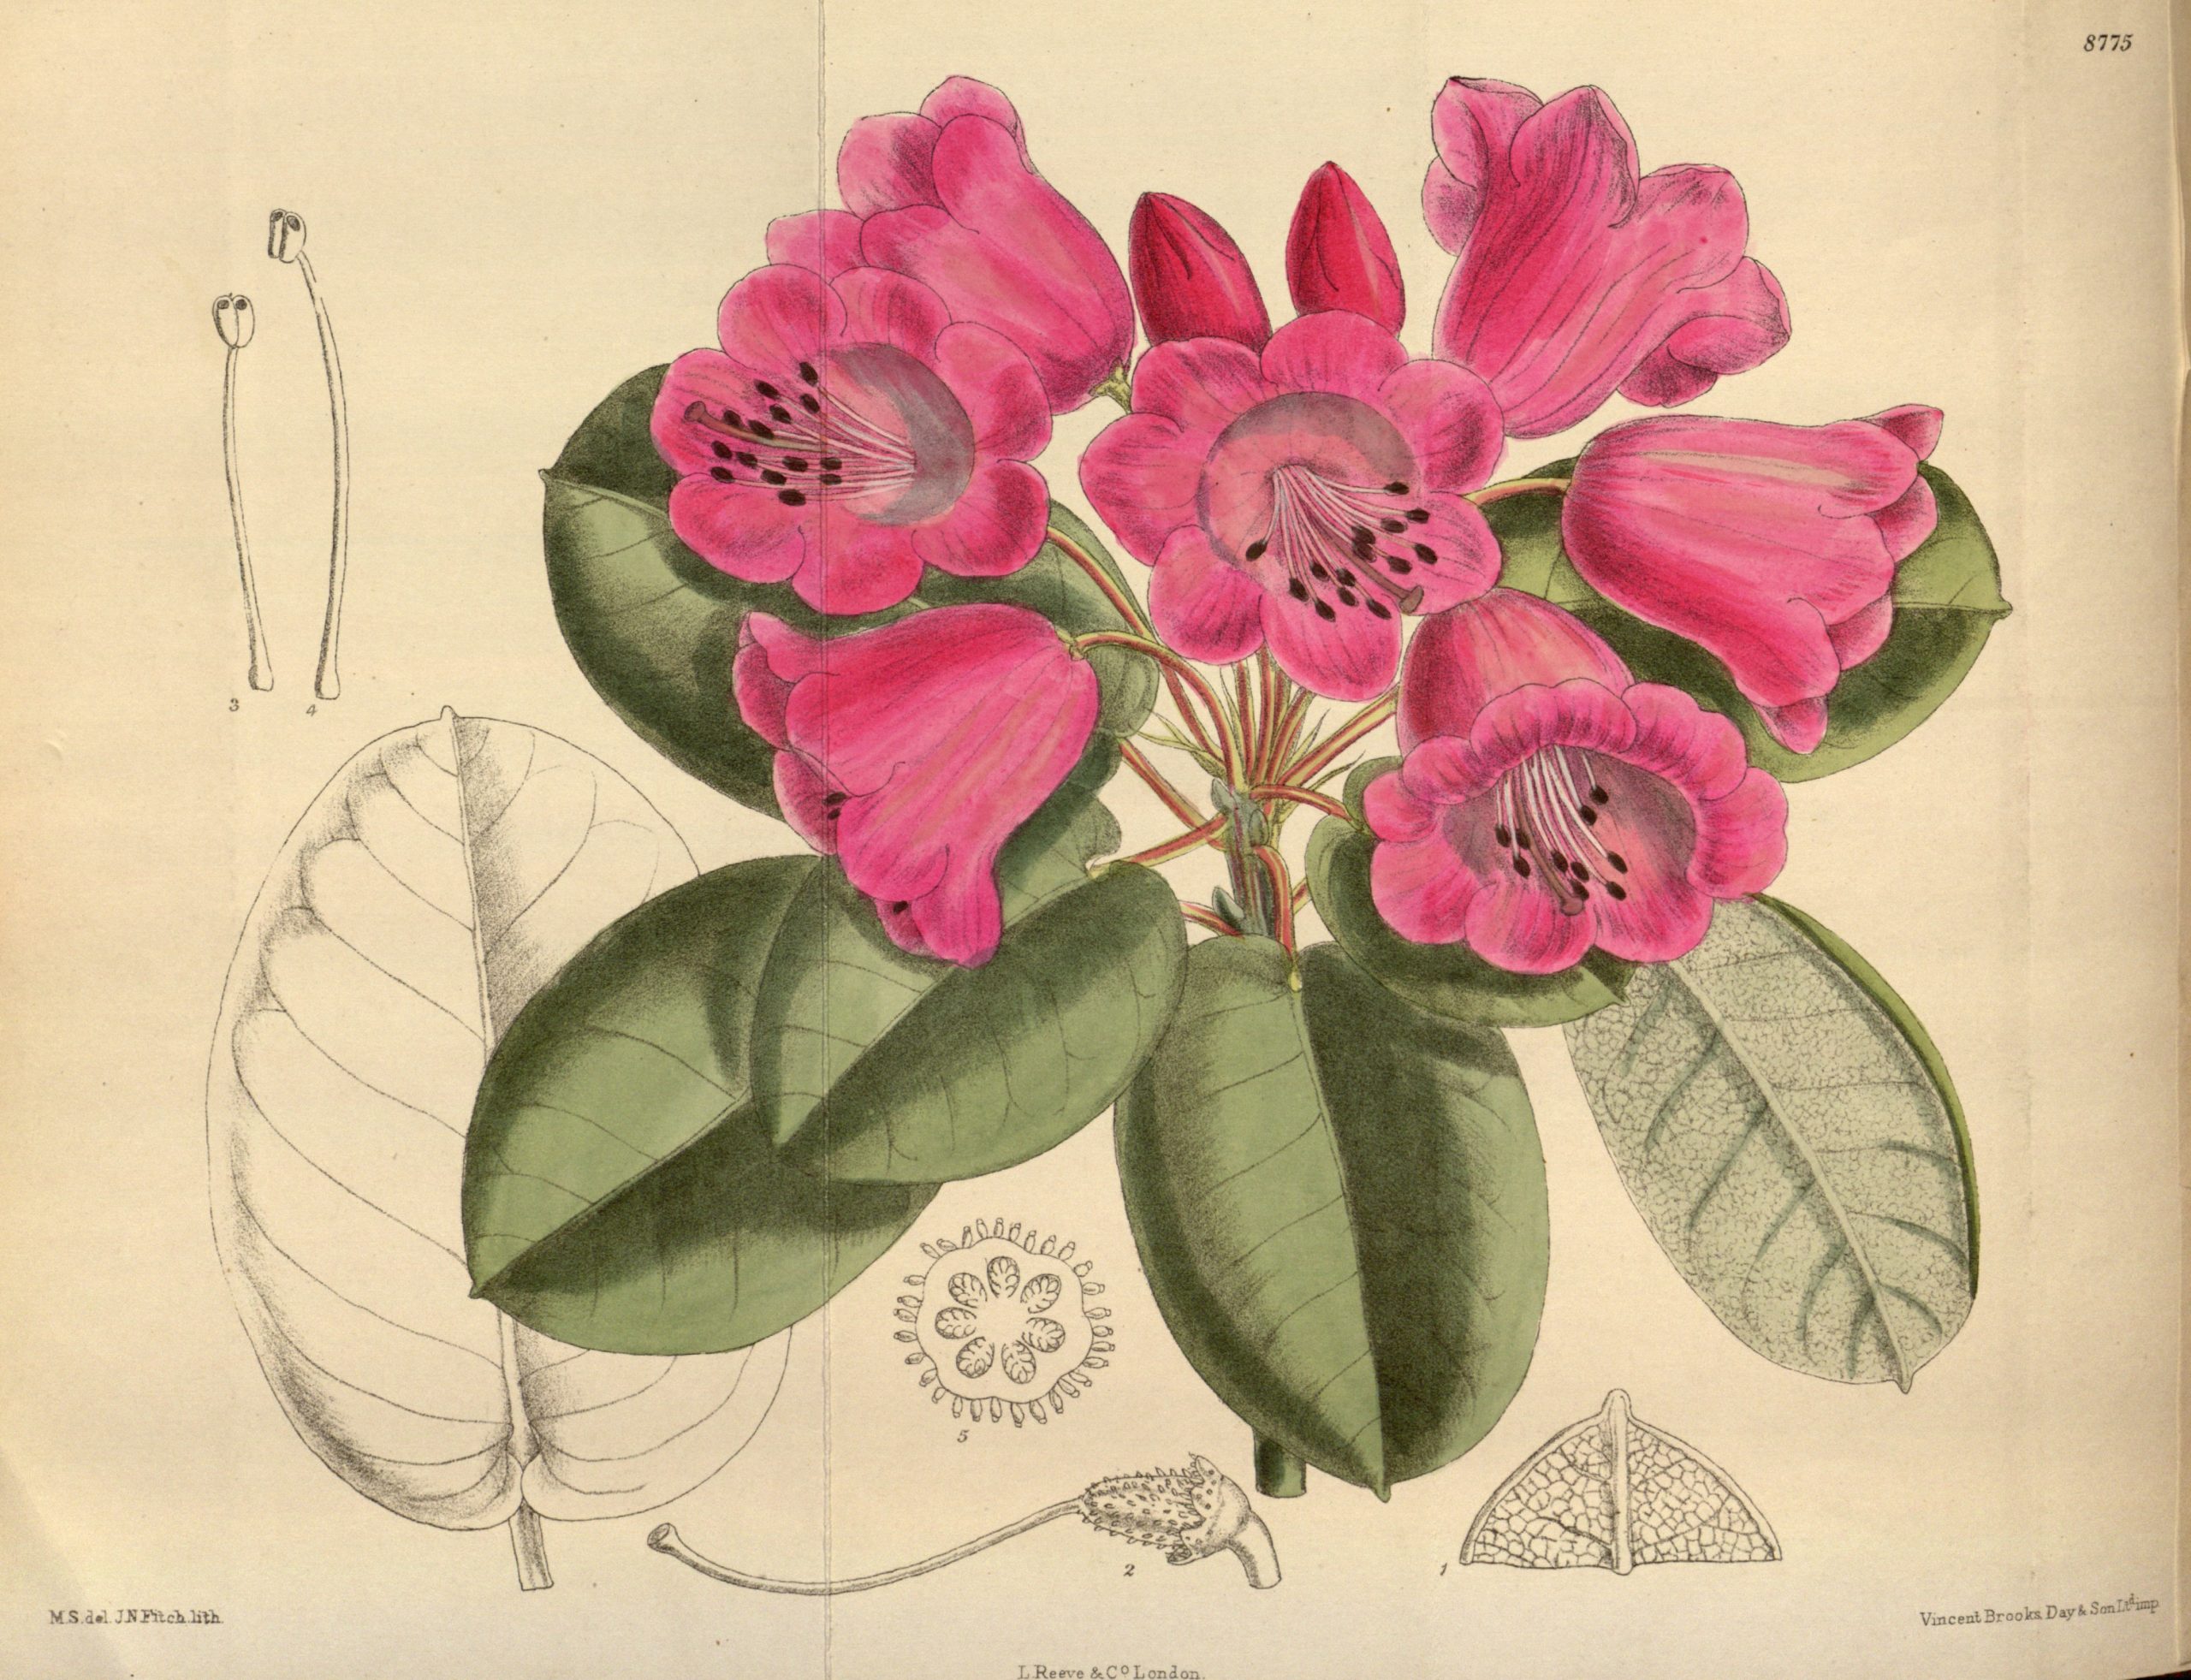 Vintage Botanical Prints - 68 in a series - Rhododendron orbiculare from Curtis's botanical magazine (1801)